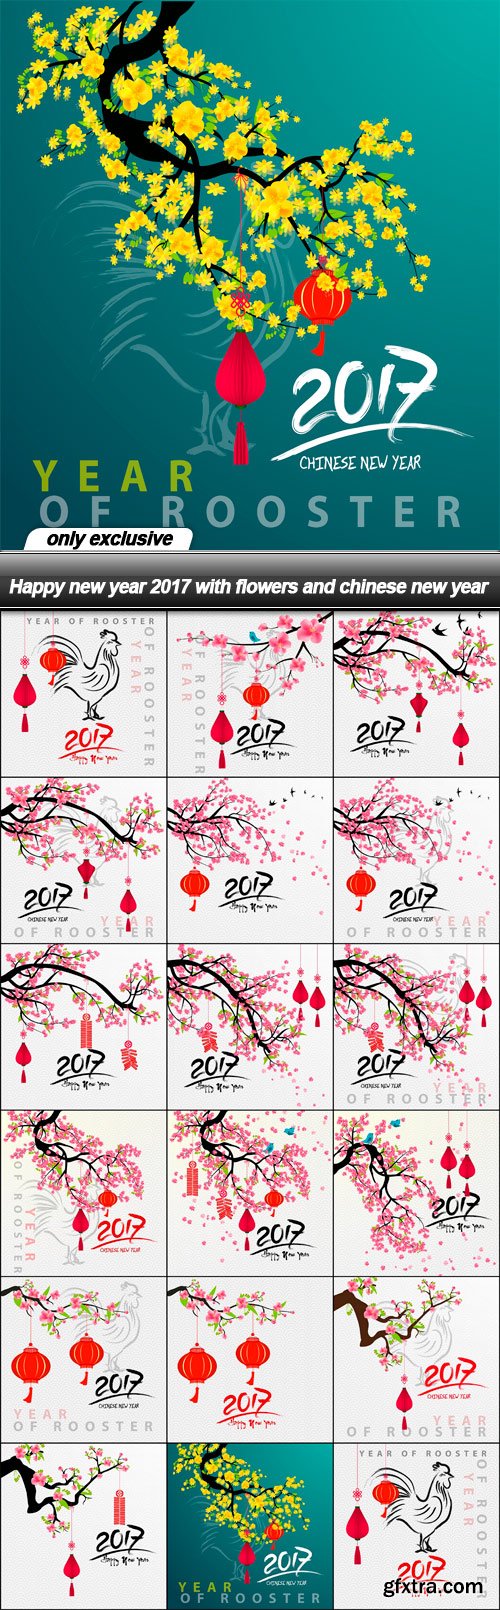 Happy new year 2017 with flowers and chinese new year - 17 EPS